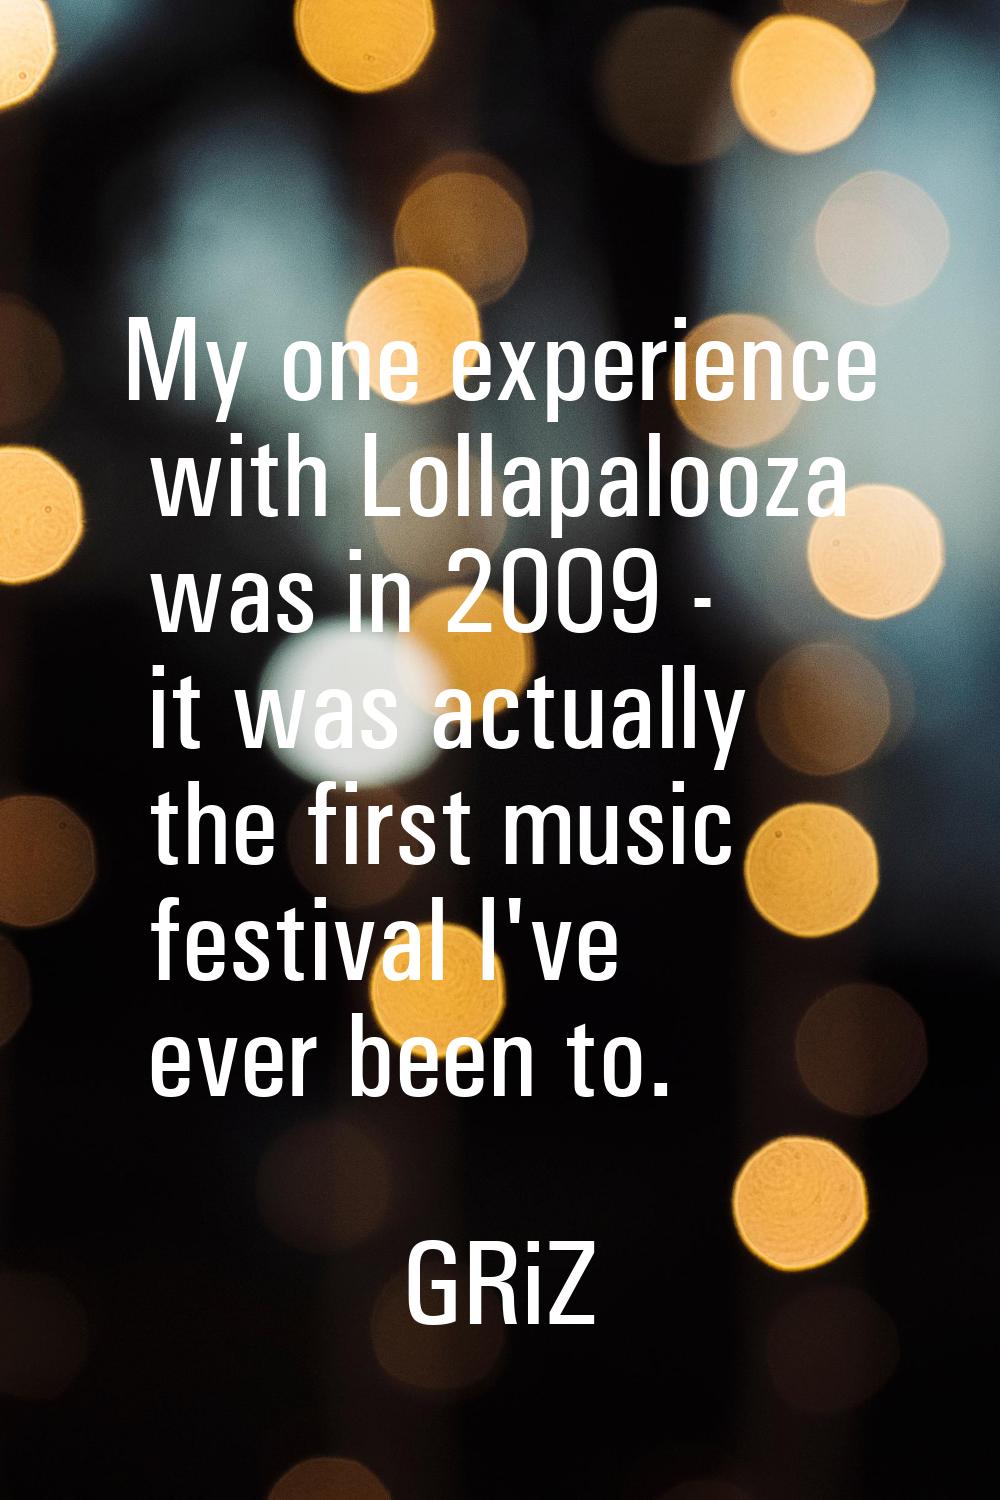 My one experience with Lollapalooza was in 2009 - it was actually the first music festival I've eve